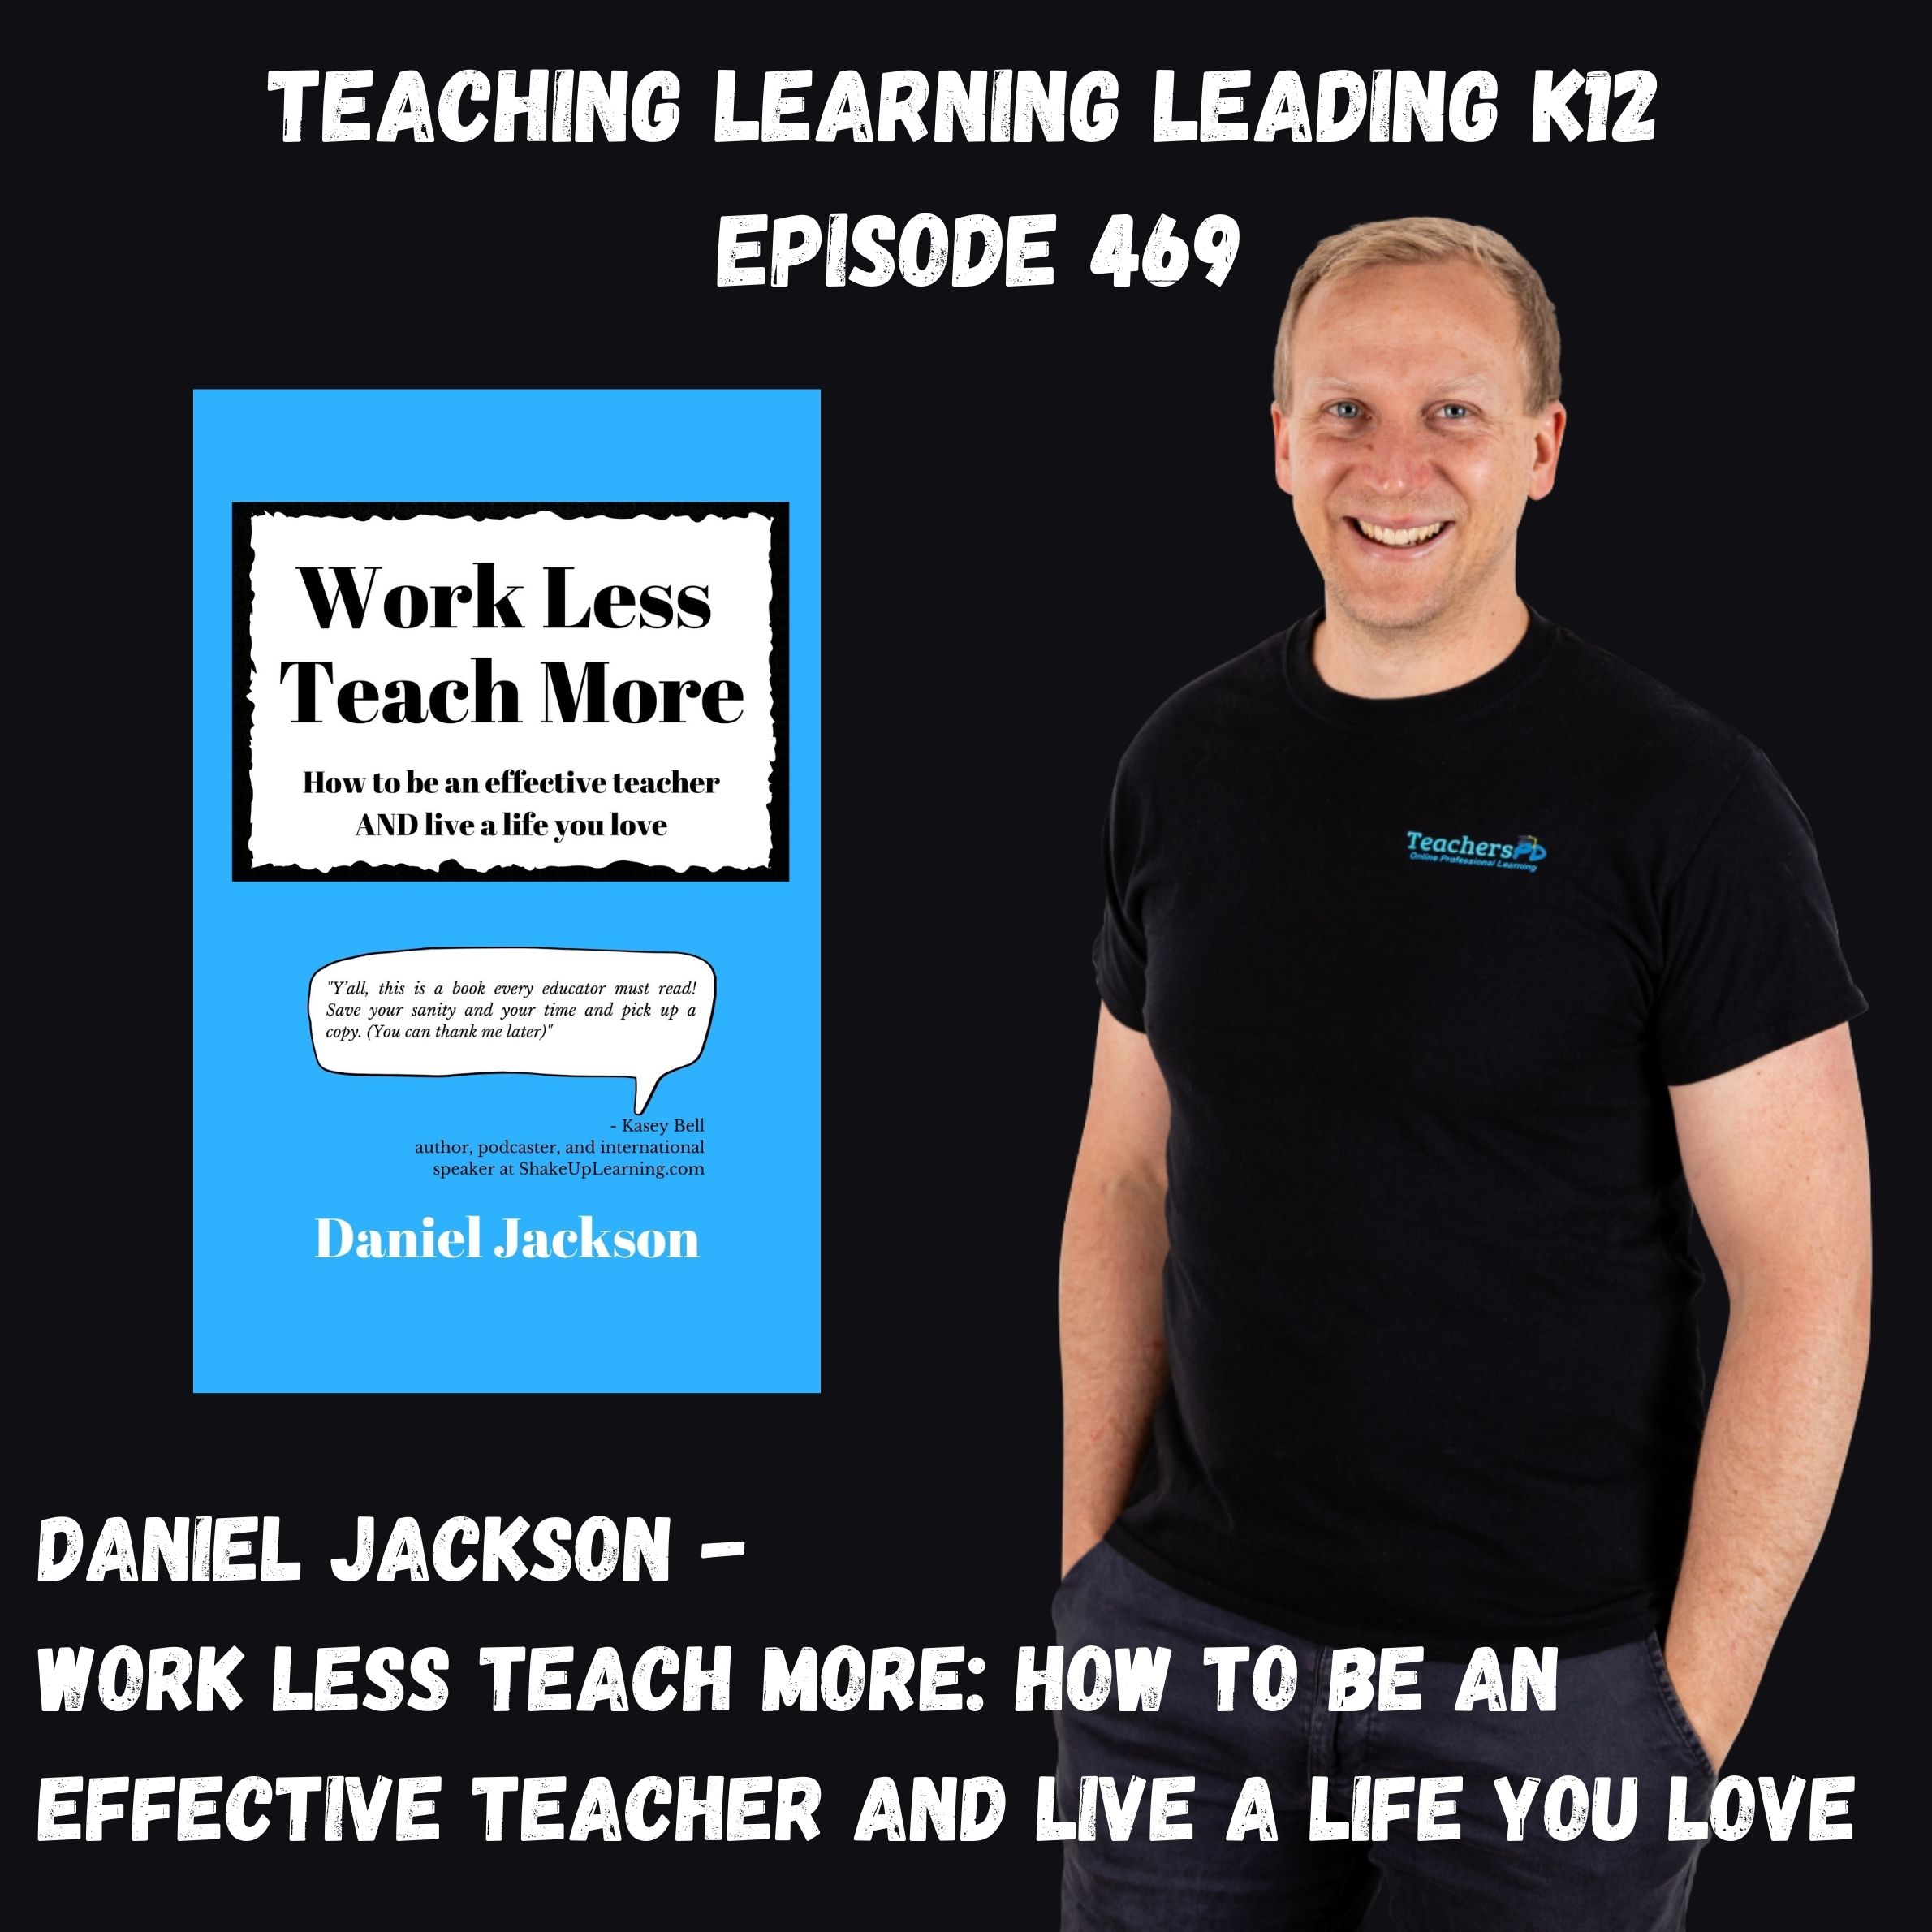 Daniel Jackson - Work Less Teach More: How to be an effective teacher and live a life you love - 469